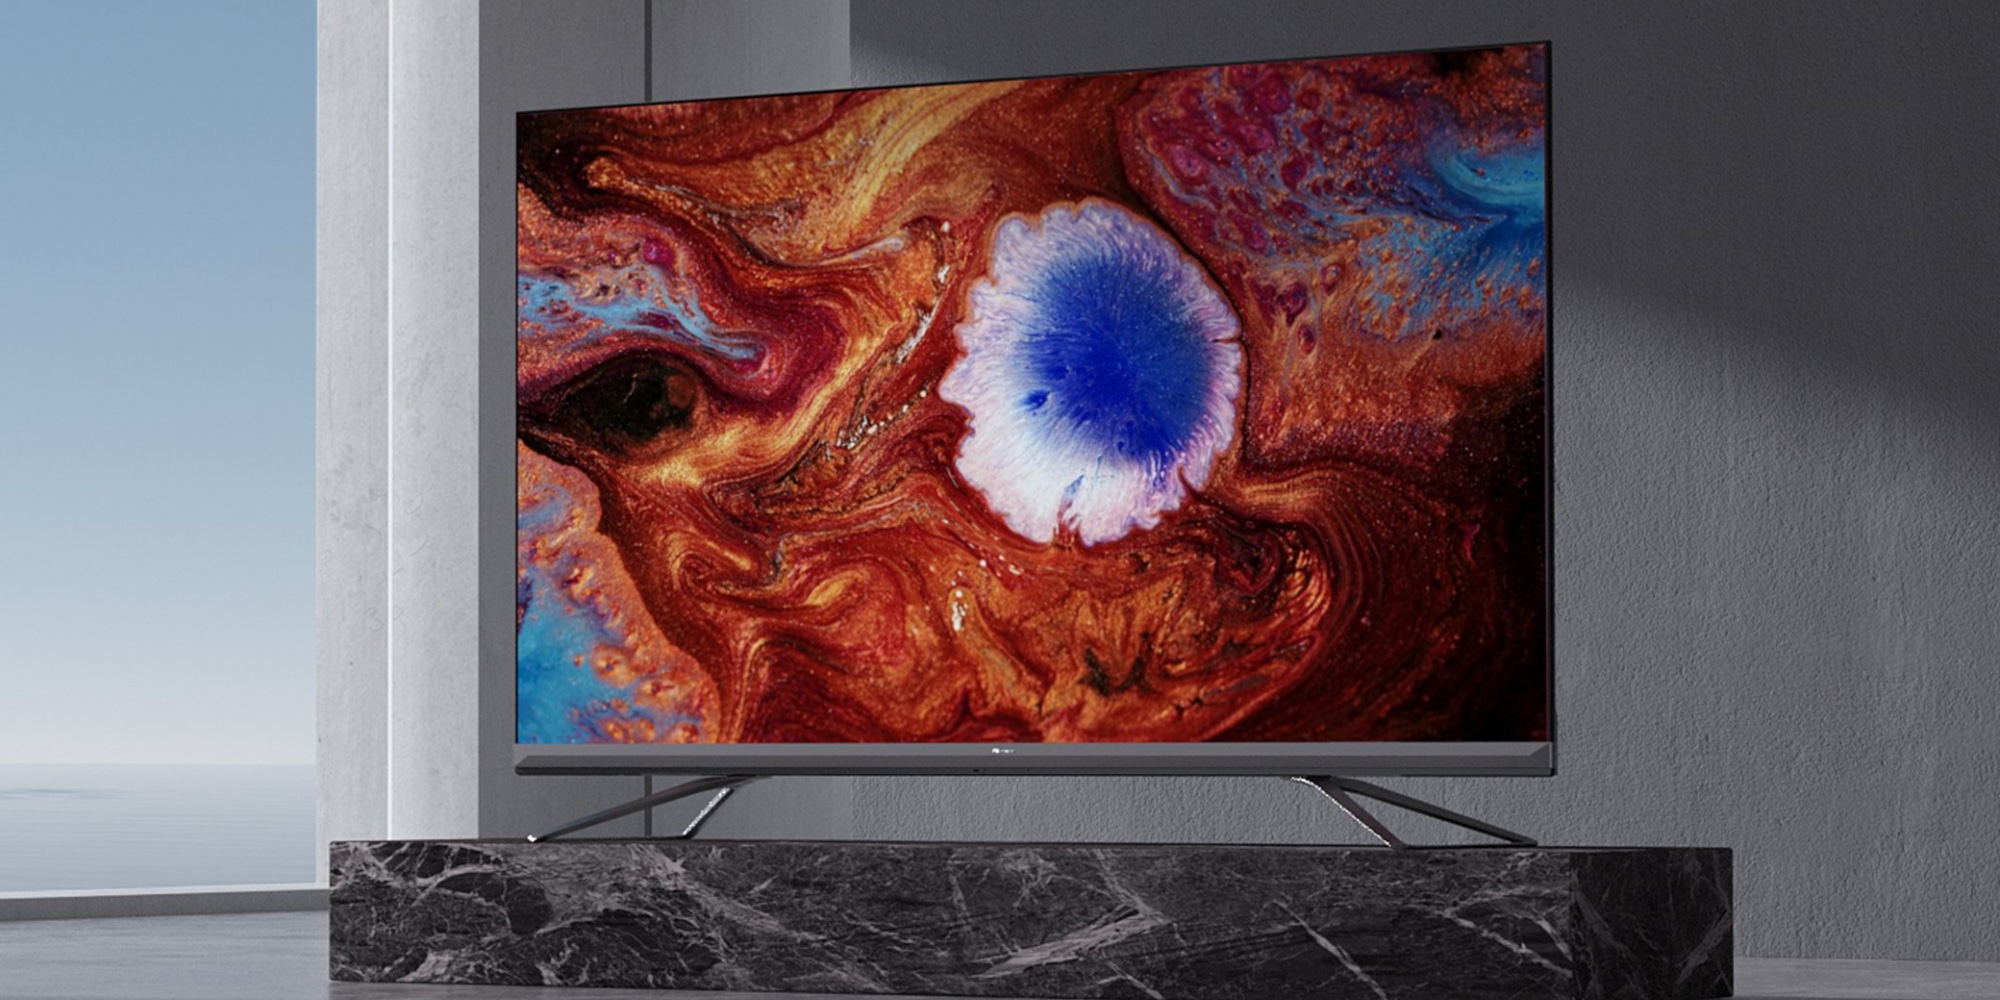 Hisense's affordable, HDR-ready U6K TV has hit an all-time low - The Verge